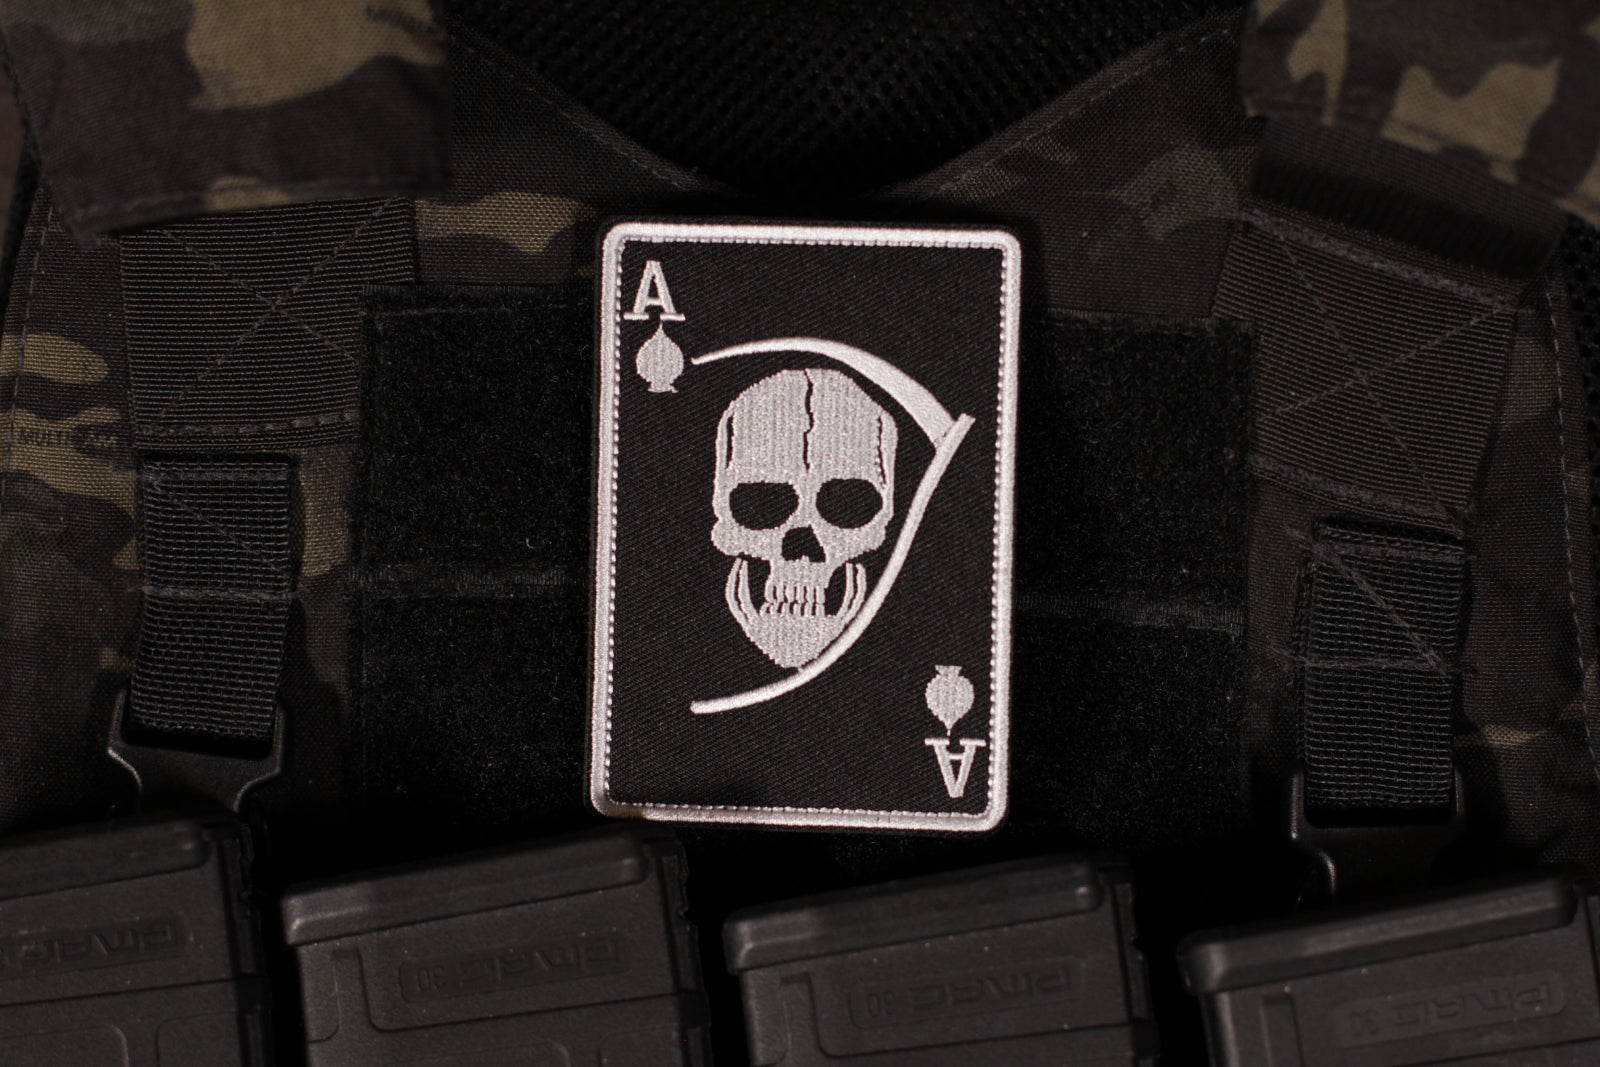 Russian Coat of Arms Patch | Kula Tactical